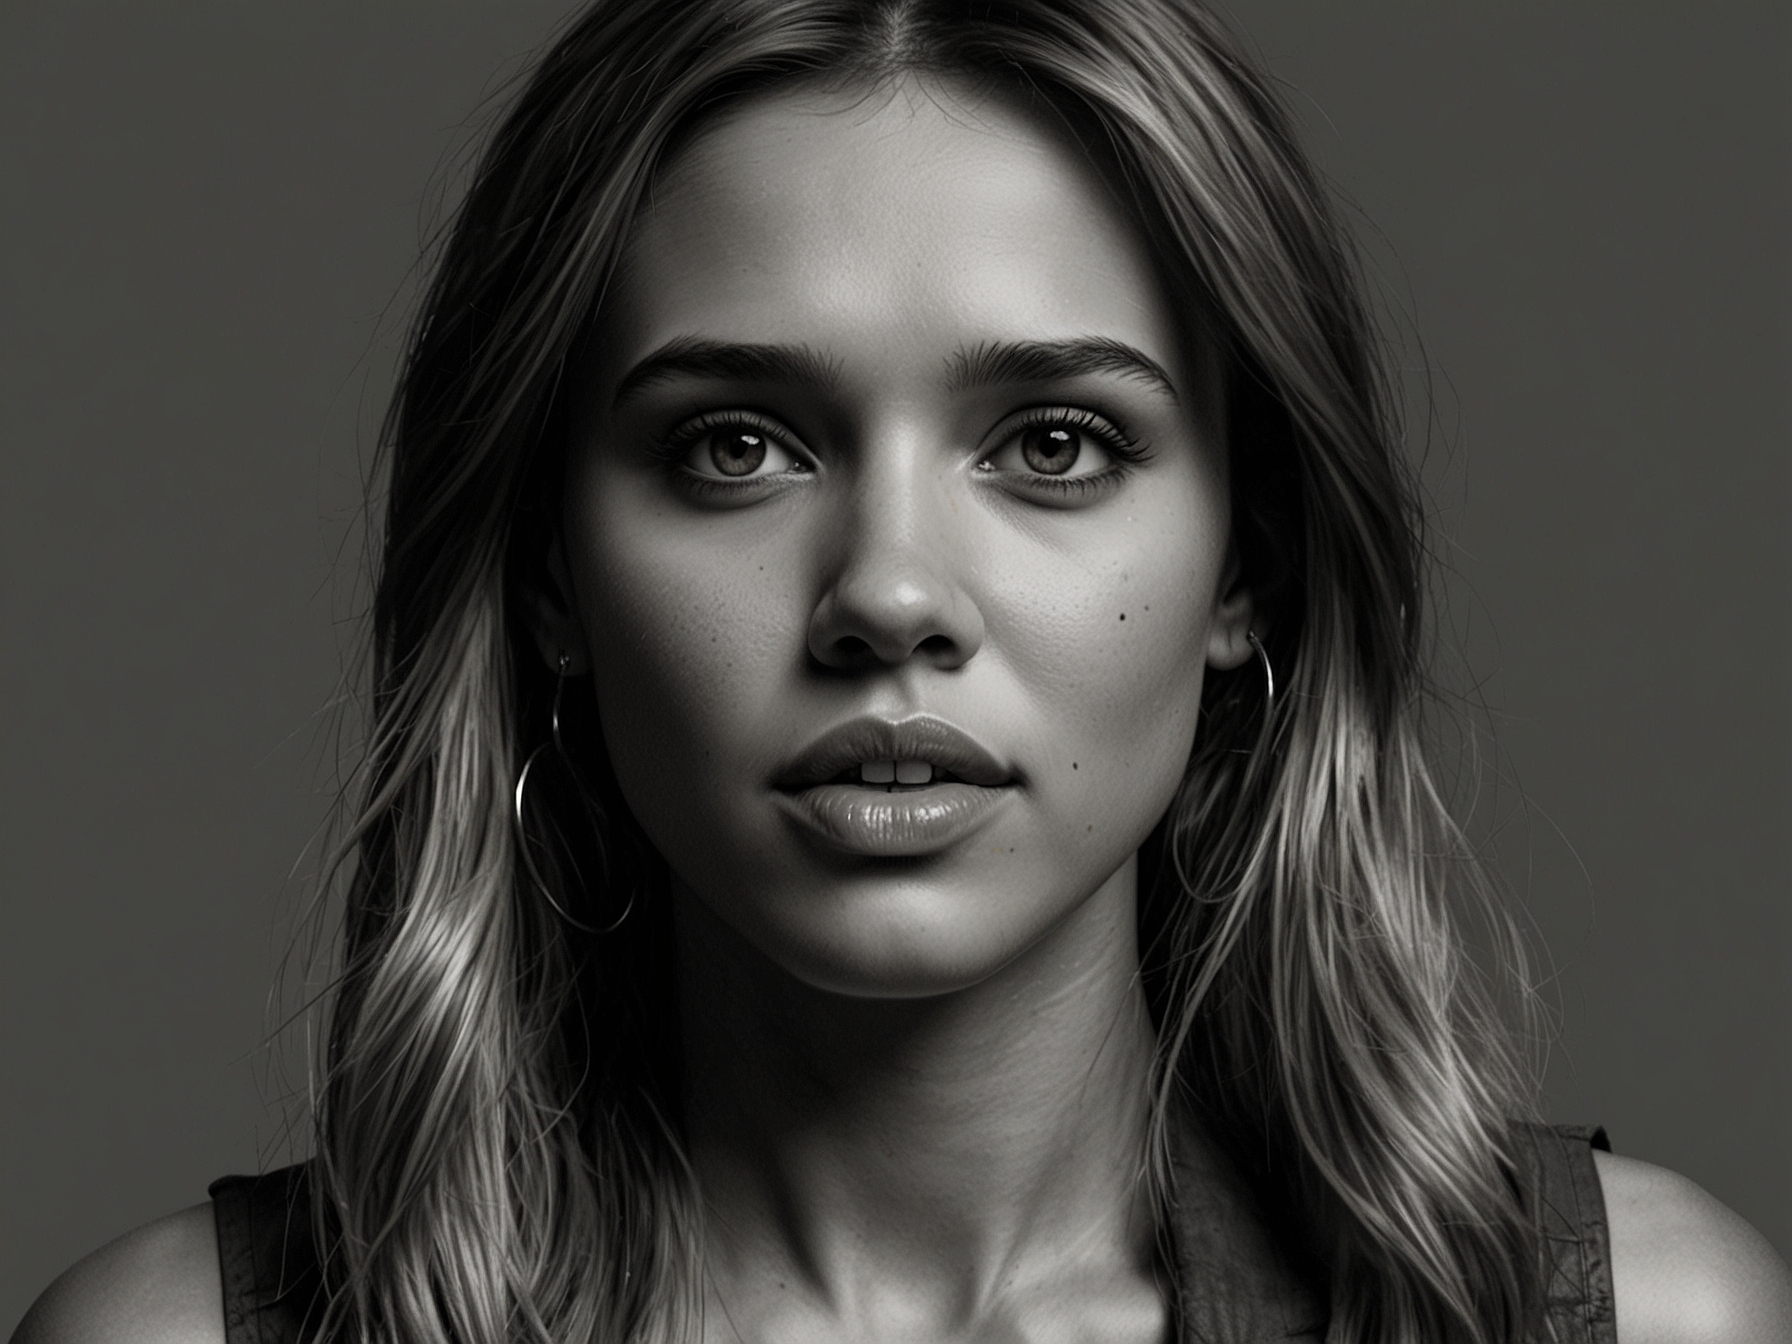 Jessica Alba, charismatic and engaging, recollects her famous lines from past roles during a promotional video for 'Trigger Warning.' She exudes nostalgia and excitement, reigniting fan memories.